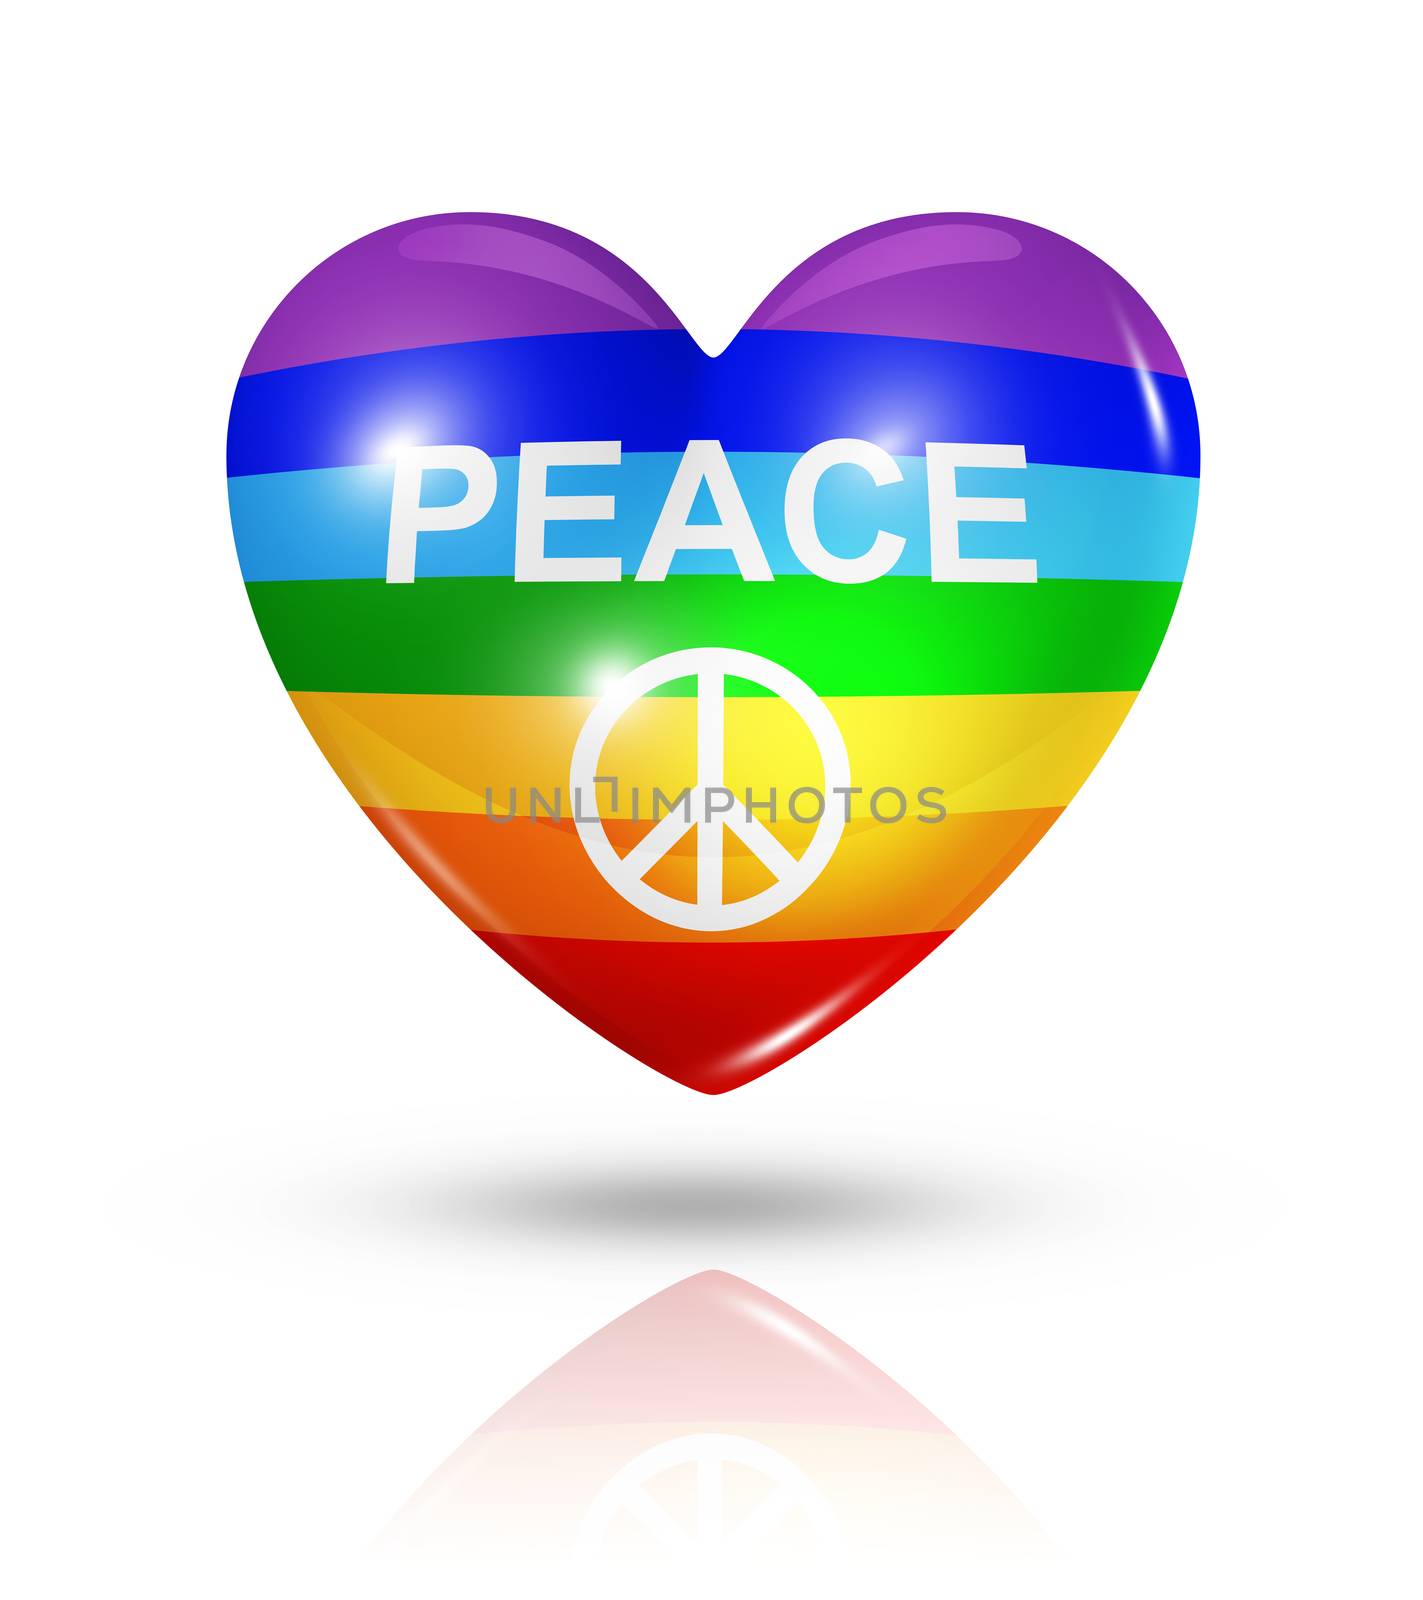 Love peace, heart flag icon by daboost